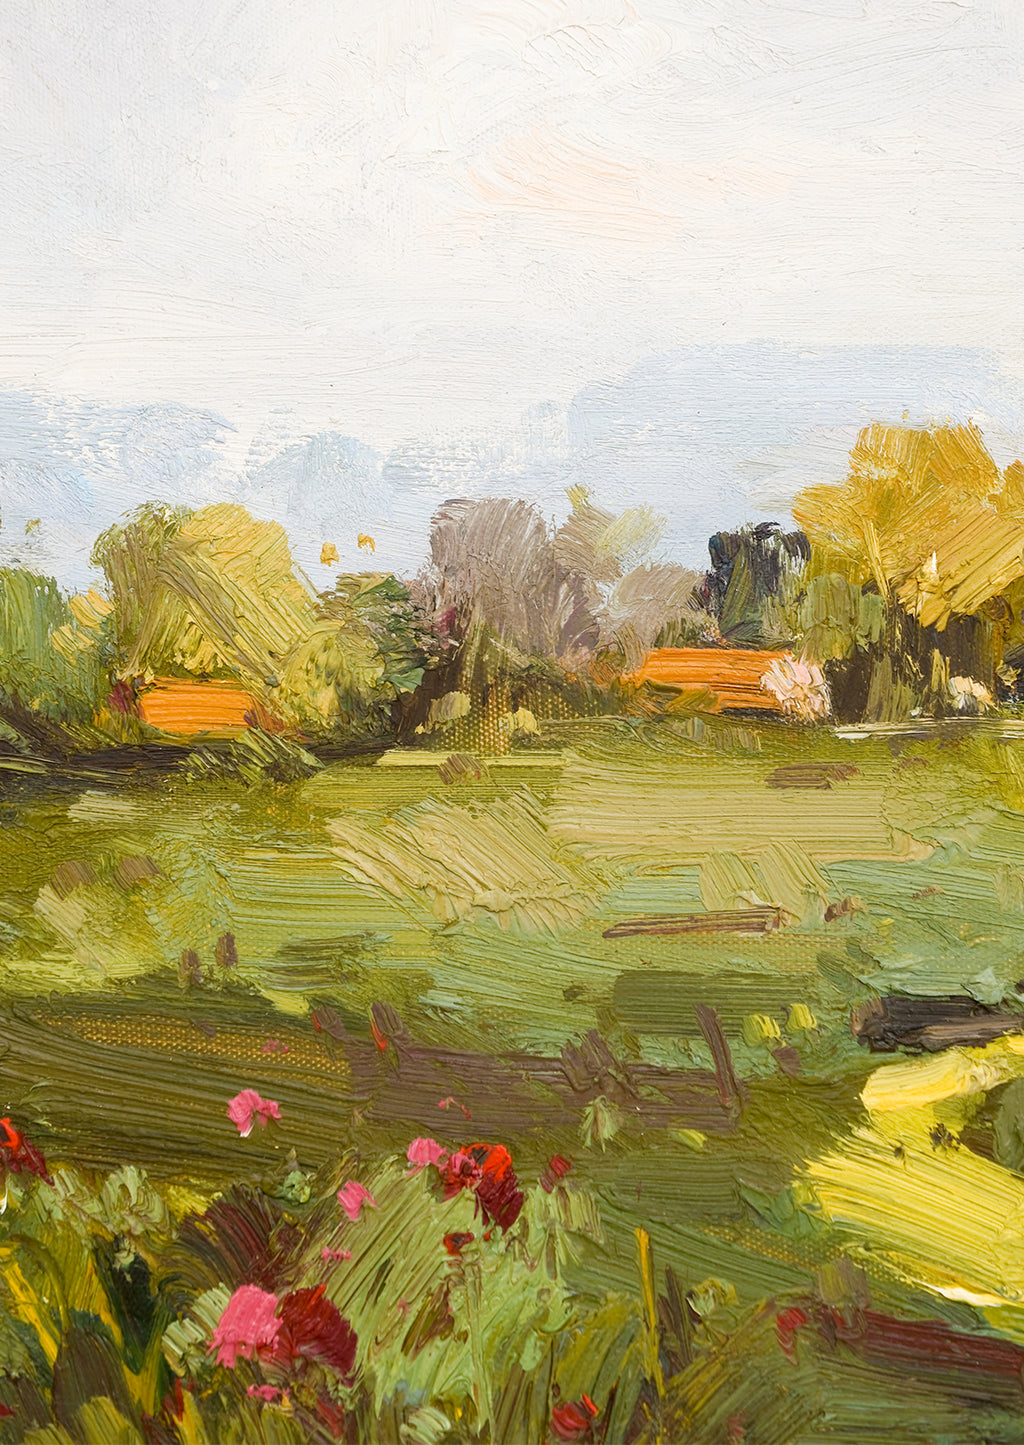 2: An original oil painting of a landscape in the country.